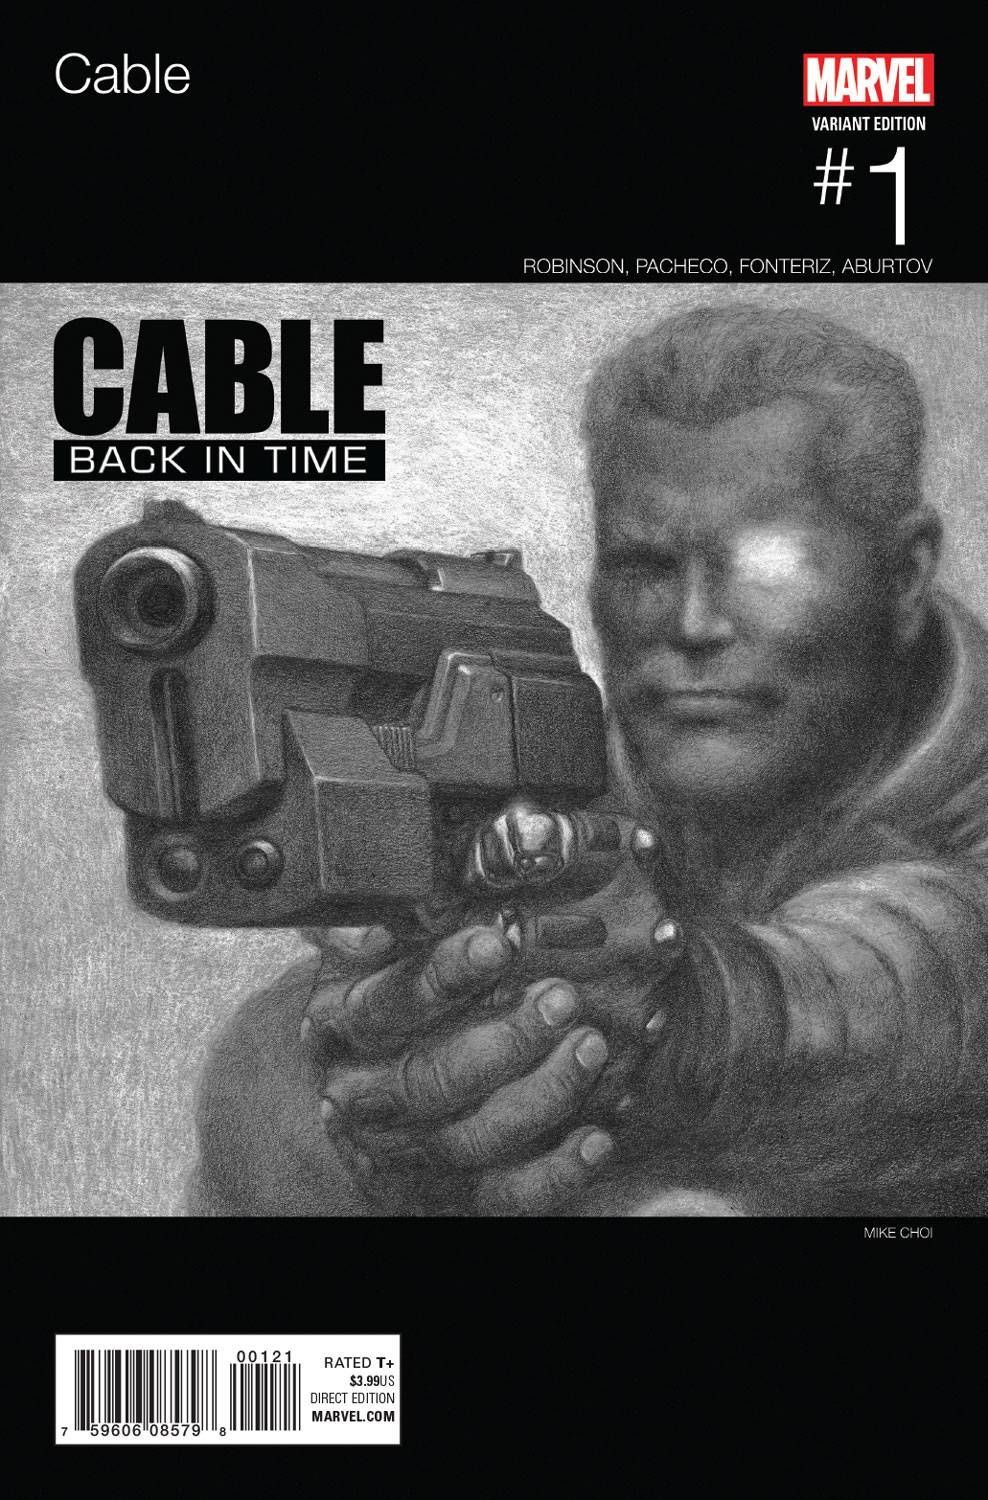 Cable Vol 3 #1 Cover B Variant Mike Choi Marvel Hip-Hop Cover (Resurrxion Tie-In)